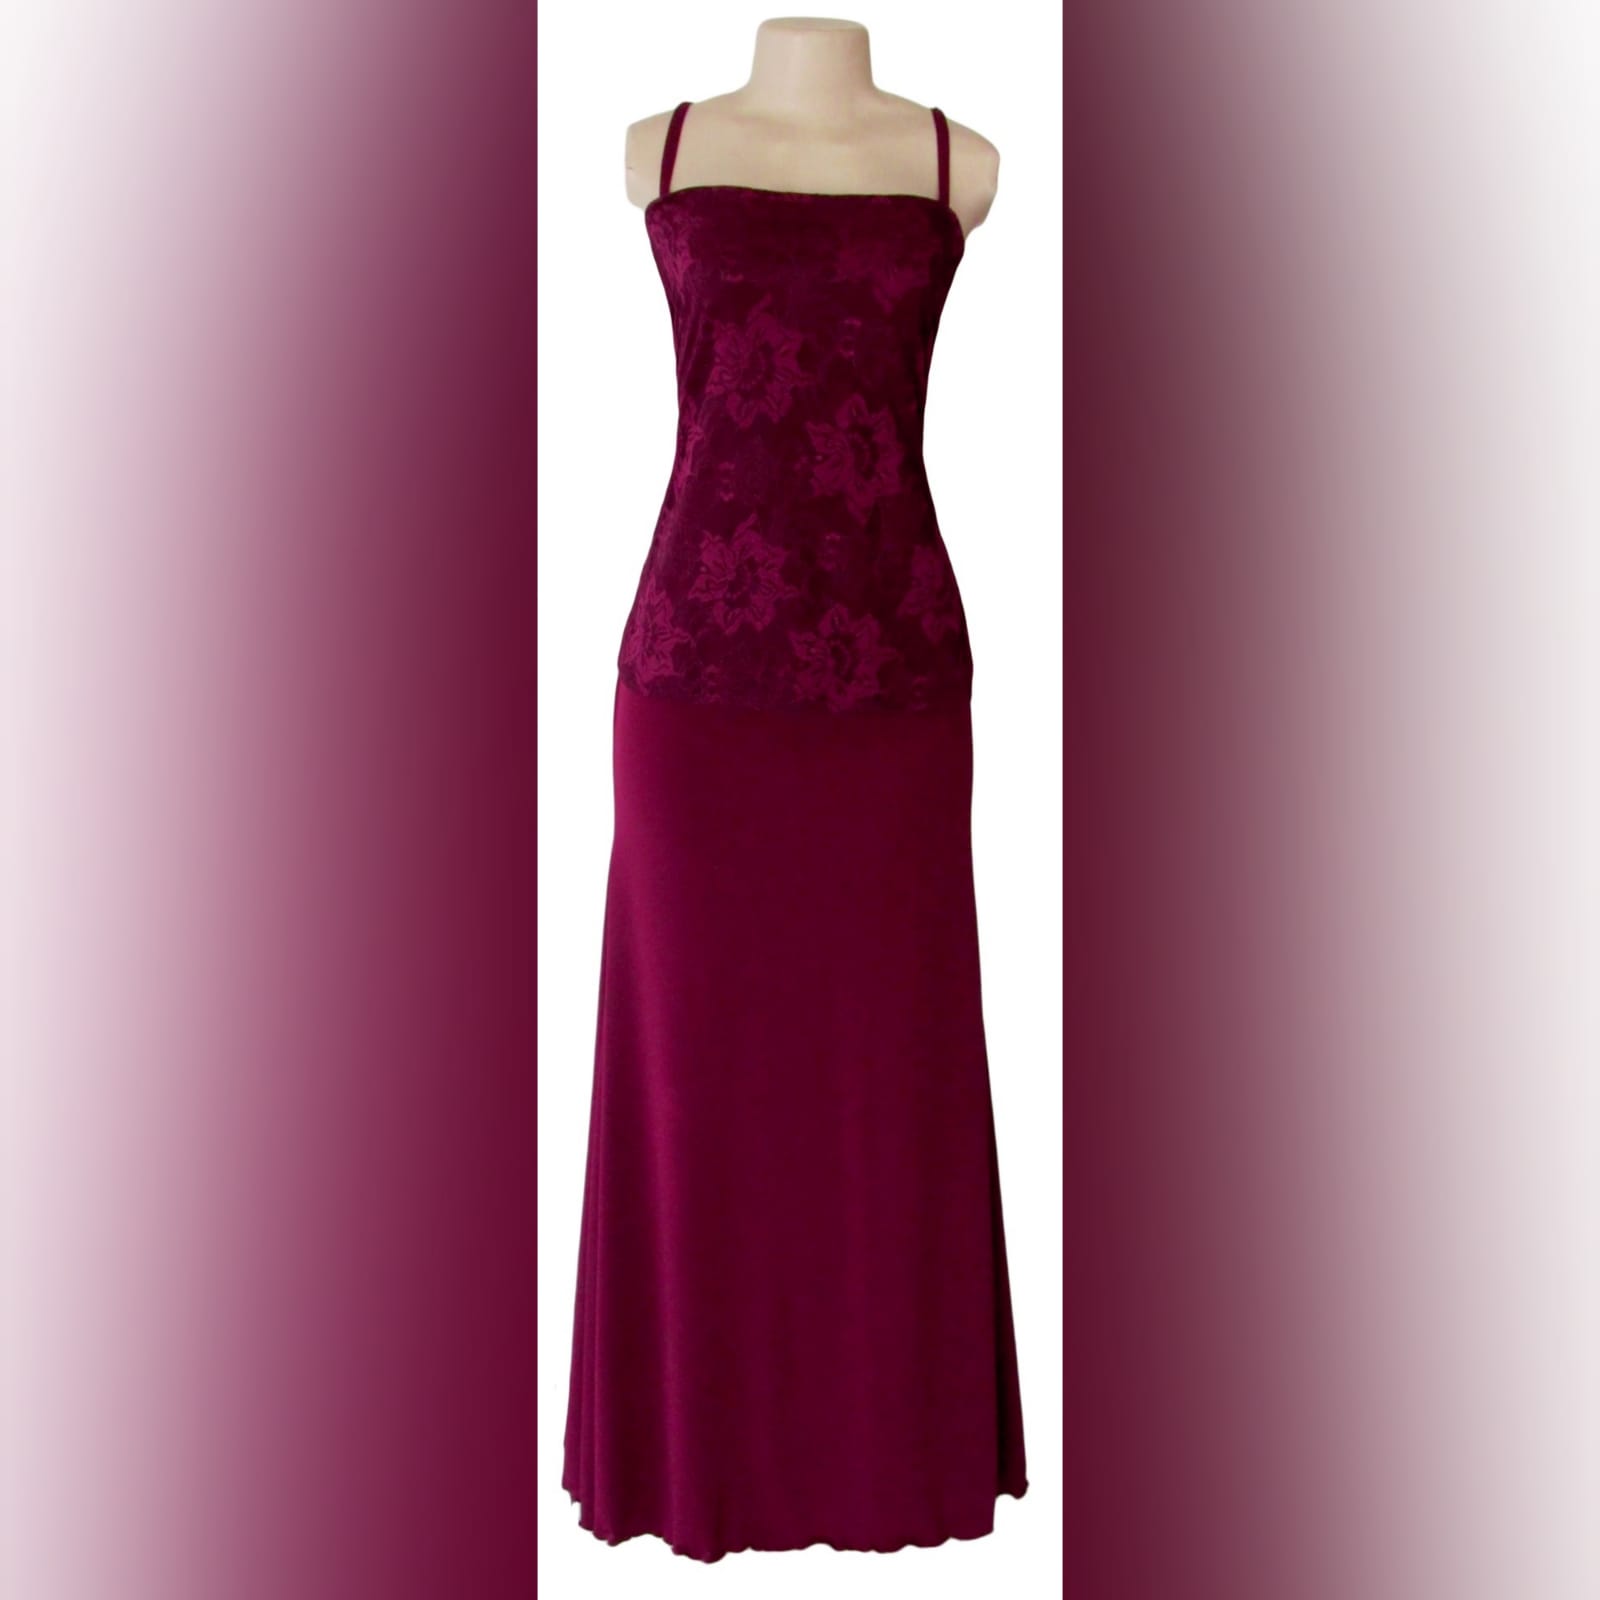 Burgundy 3 piece mother of the bride outfit 2 burgundy 3 piece mother of the bride outfit. With a lace top and a removable lace jacket with collar, ruched belt and sheer 3/4 sleeves with a cuff.